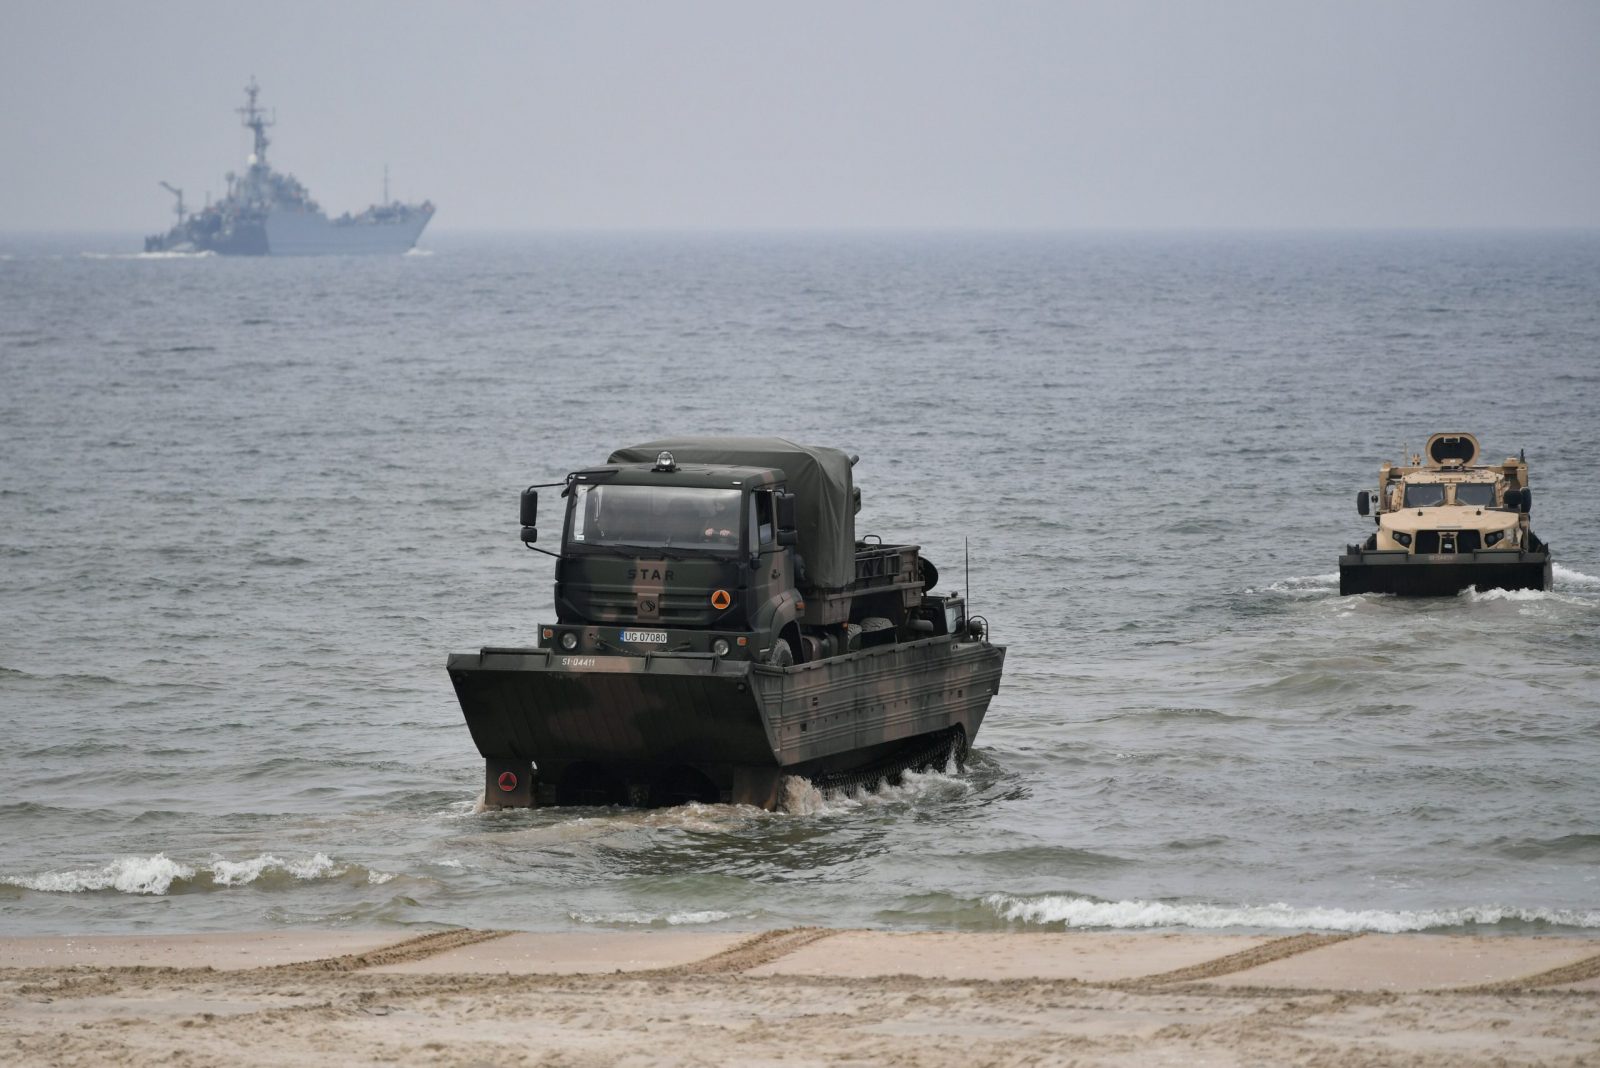 epa10576973 Amphibious vehicles land on a beach section in tactical exercises of the 16th Mechanized Division along with allied troops under the codename 'Zalew-23', in Skowronki near the Vistula Spit canal, northern Poland, 17 April 2023. Following a break over the Easter holidays some 2,500 soldiers from units of the Land Forces, the Navy, Territorial Defense Forces and allied forces that are part of the NATO Battalion Battle Group and the Engineering Forces, continued to take part in the military exercise aimed at responding to threats of military and non-military nature from the sea, using the new waterway through the Vistula Spit, in the border area on the Vistula Lagoon, according to the Polish Armed Forces.  EPA/Adam Warzawa POLAND OUT